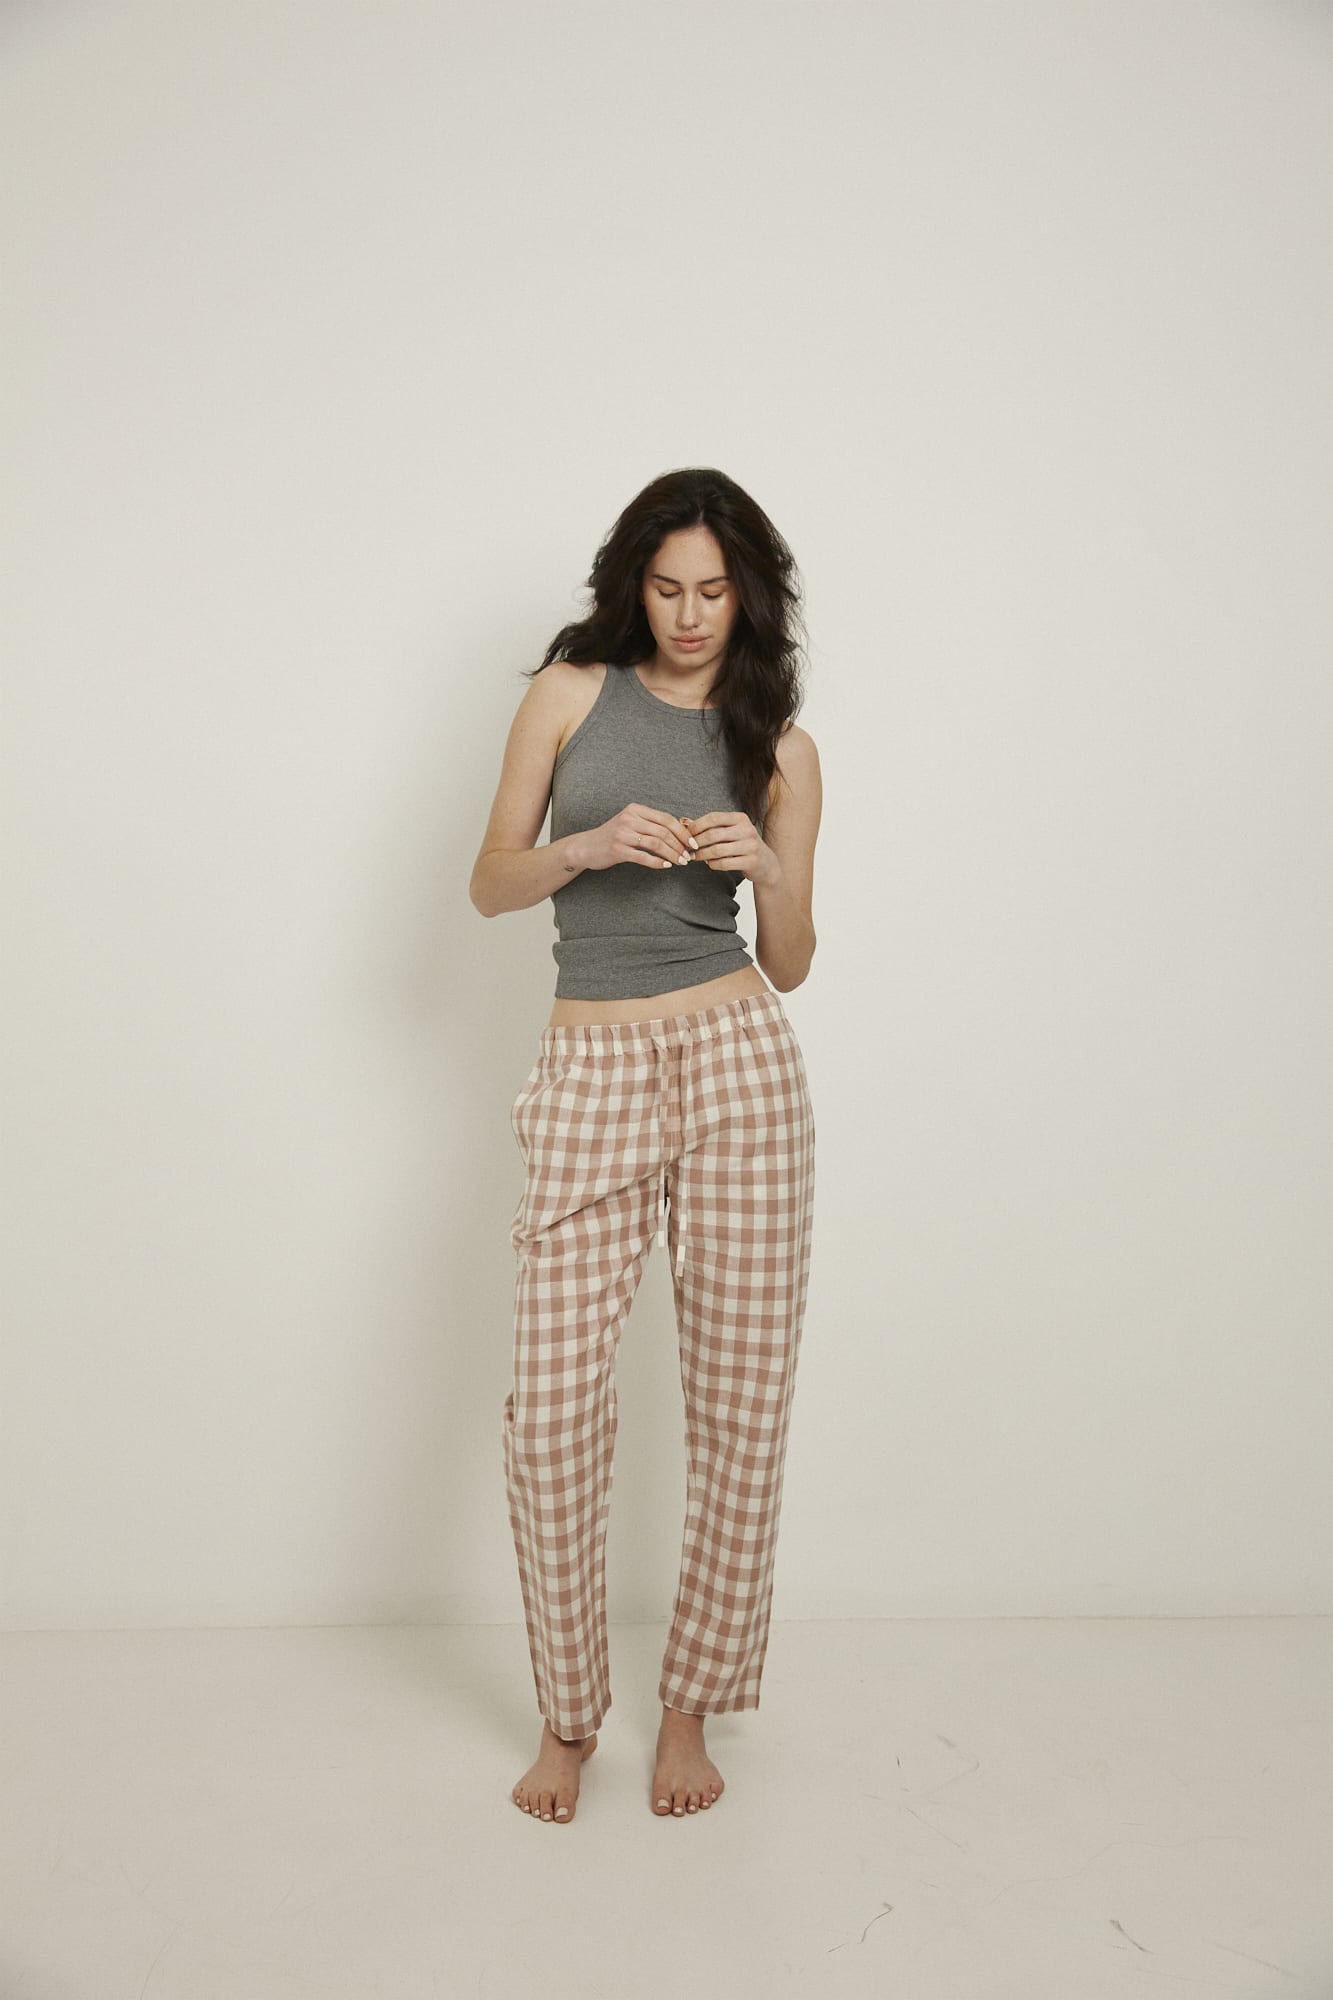 Women’s pyjama pant.  Made from an organic cotton and linen blend, in a pink and white check.  These pants feature an elasticated waistband with a drawstring for comfort.